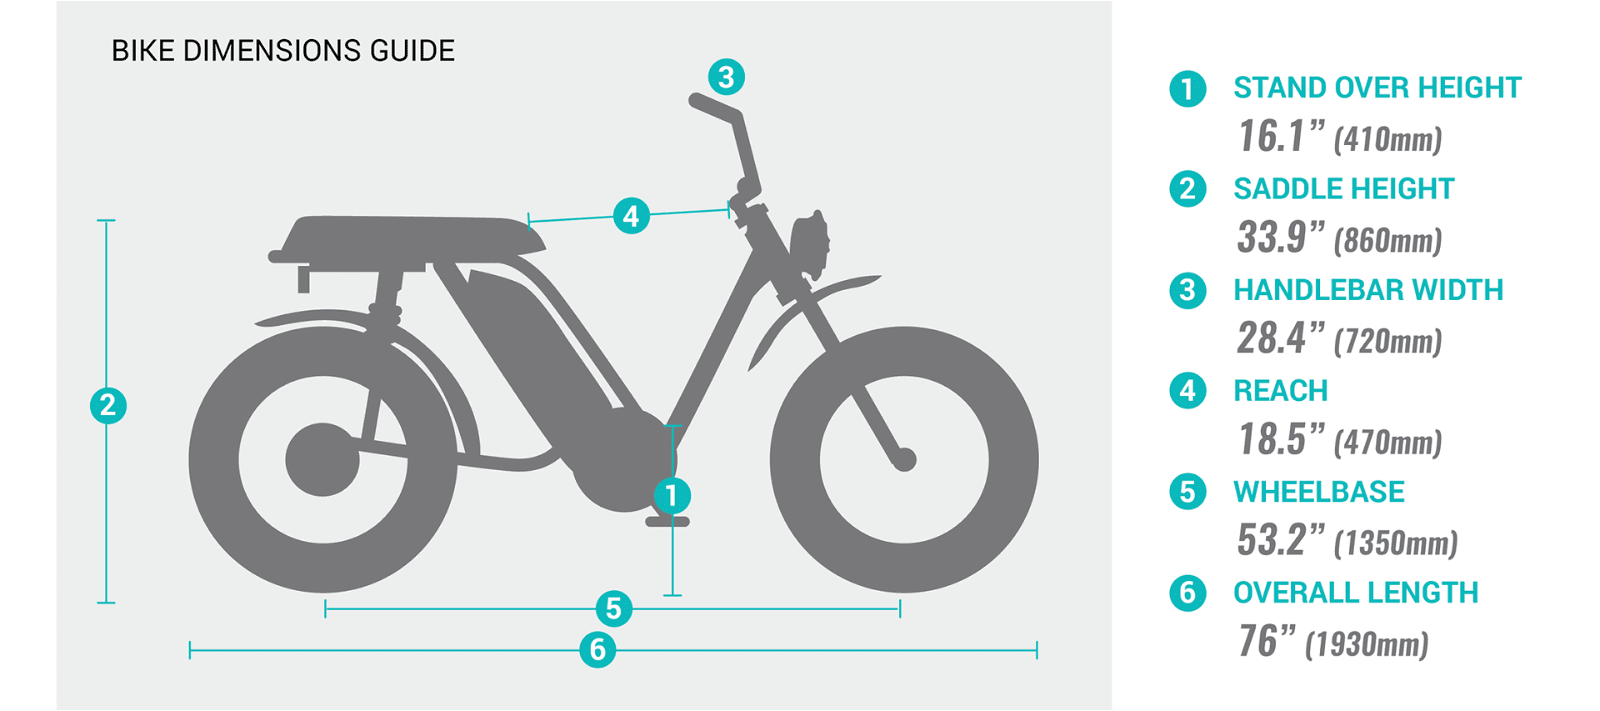 Pedego- Illustration of a Moto - The Duel Sport Ebike with labels and measurements indicating the various dimensions of the bike parts.